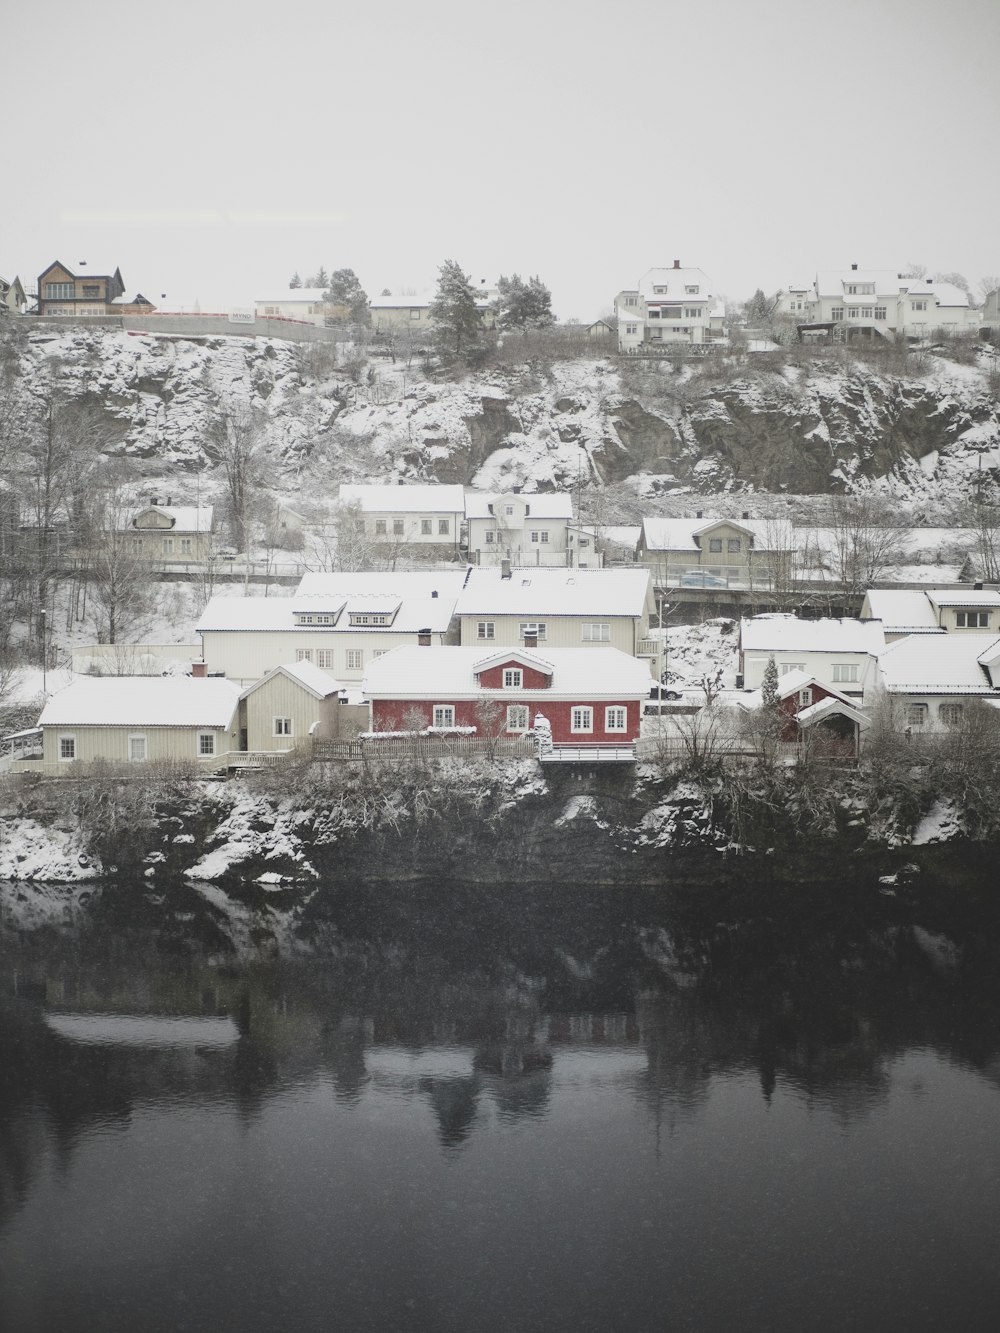 a snowy landscape with houses and a body of water